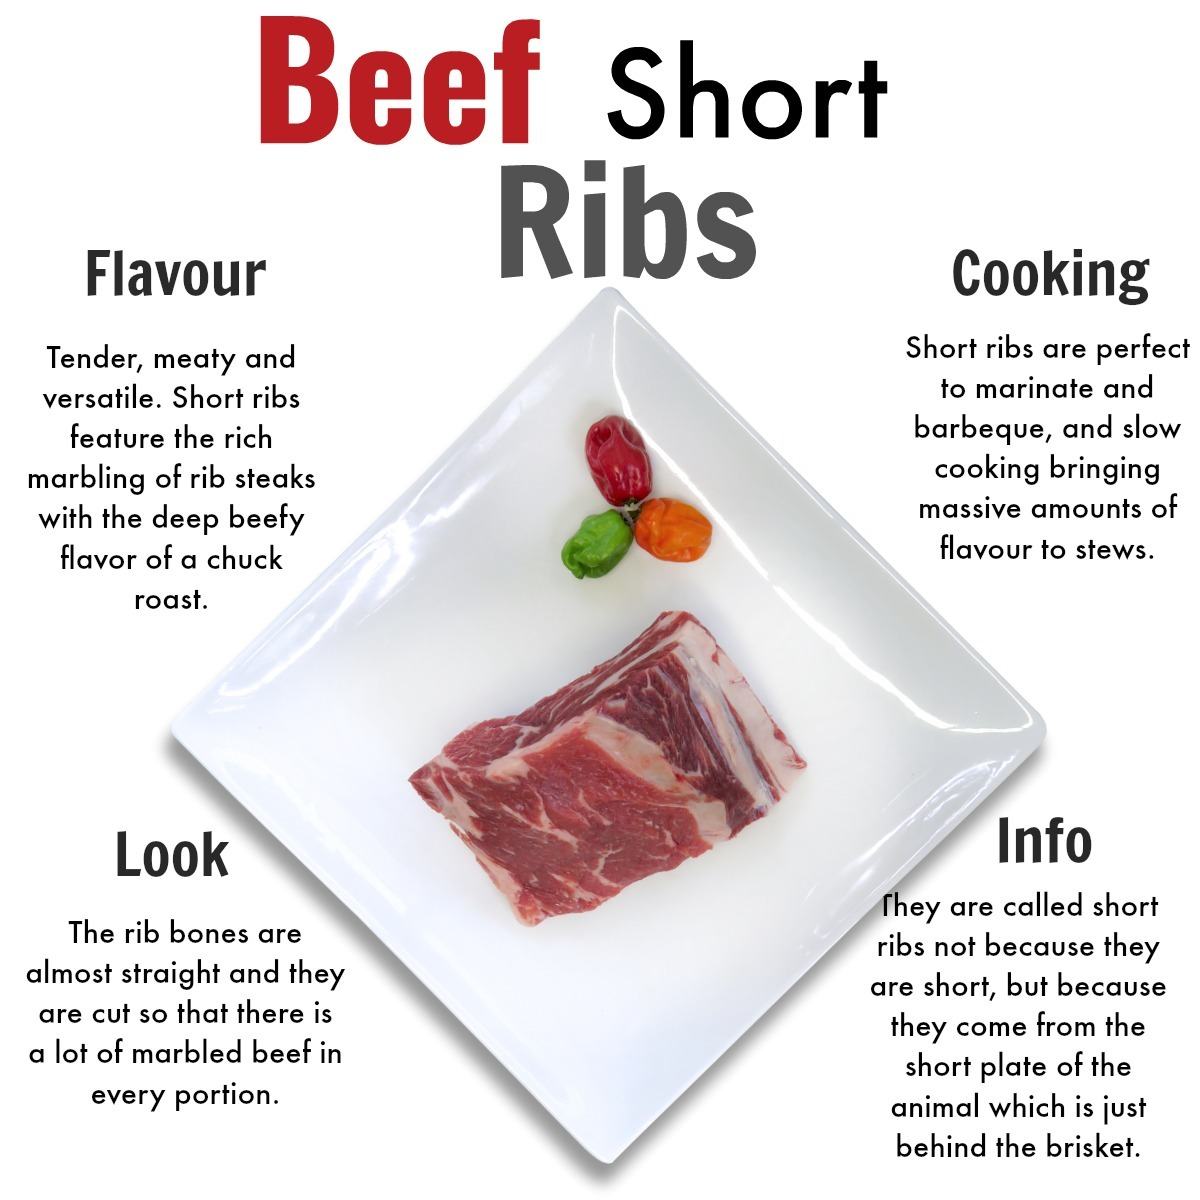 Affordable grass-fed beef delivery near me, steaks, ground beef and more - Nutrafams - Beef Short Ribs 2